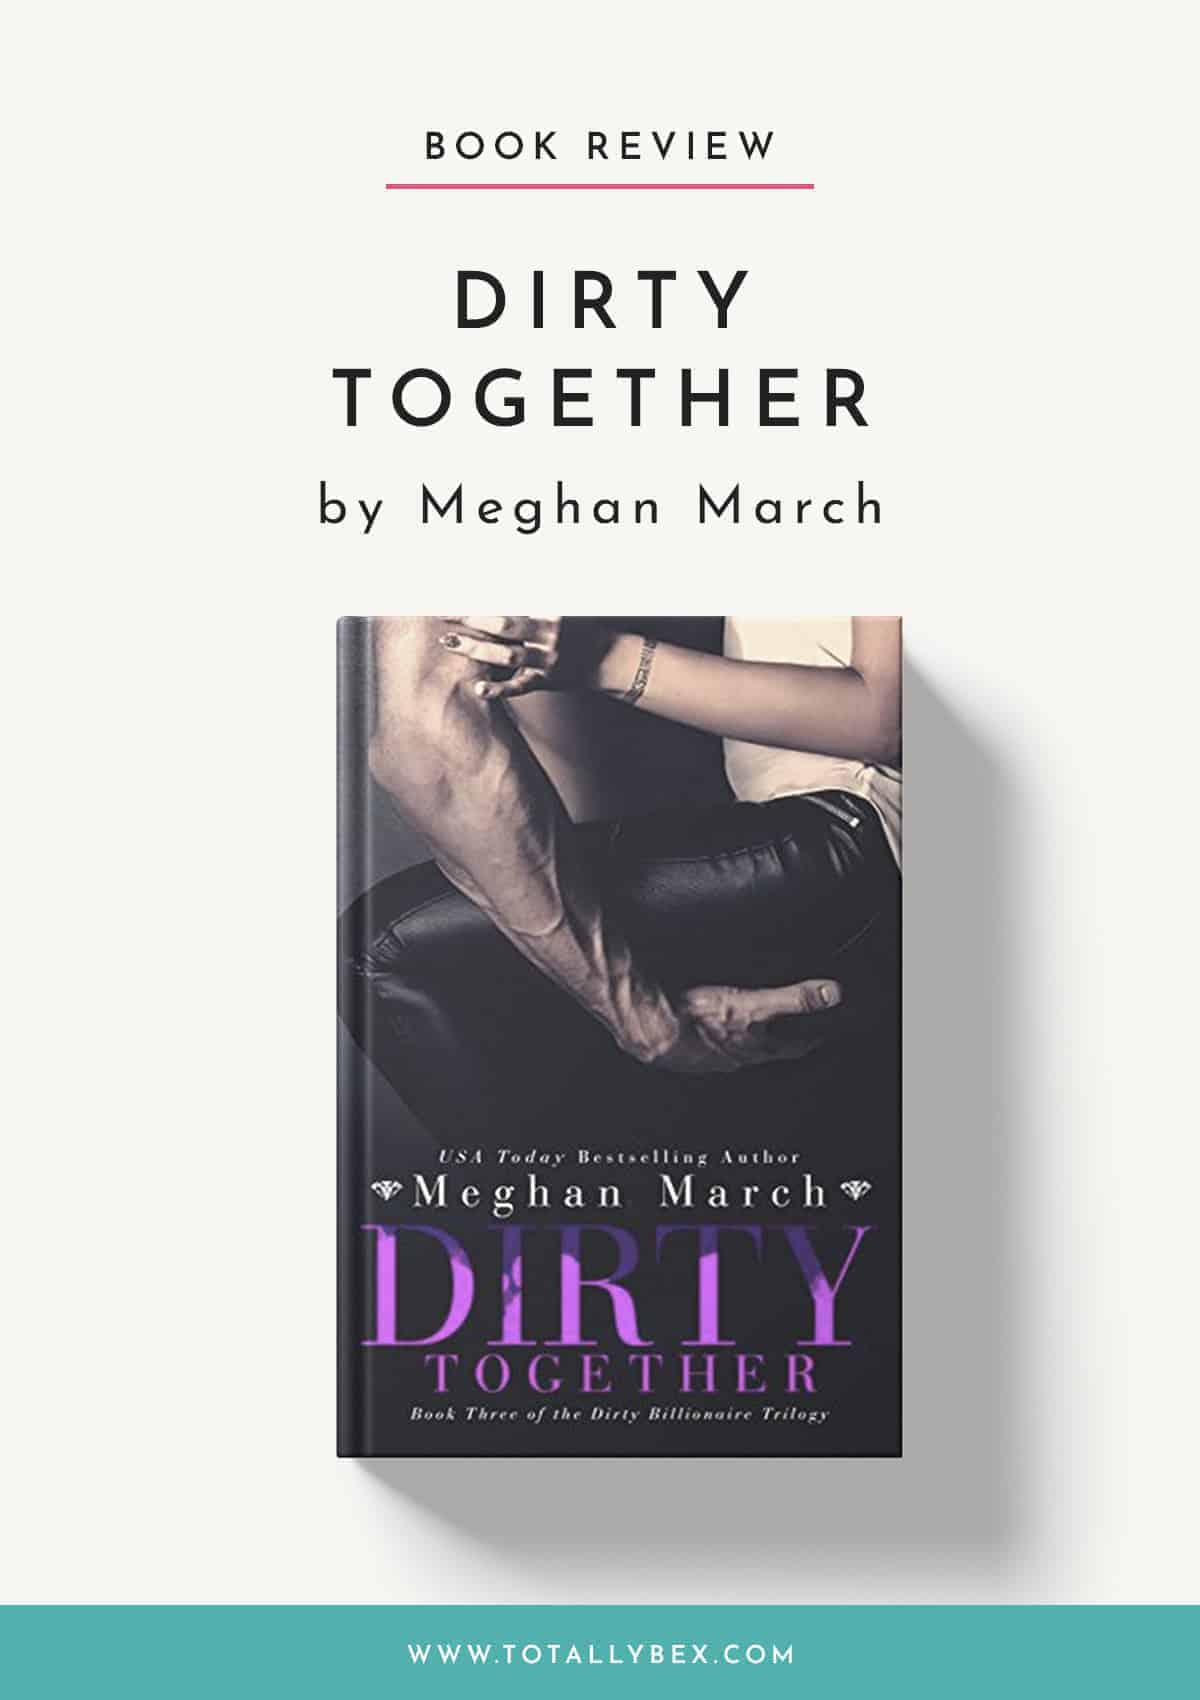 Dirty Together by Meghan March – 3rd & Final Book of the Trilogy